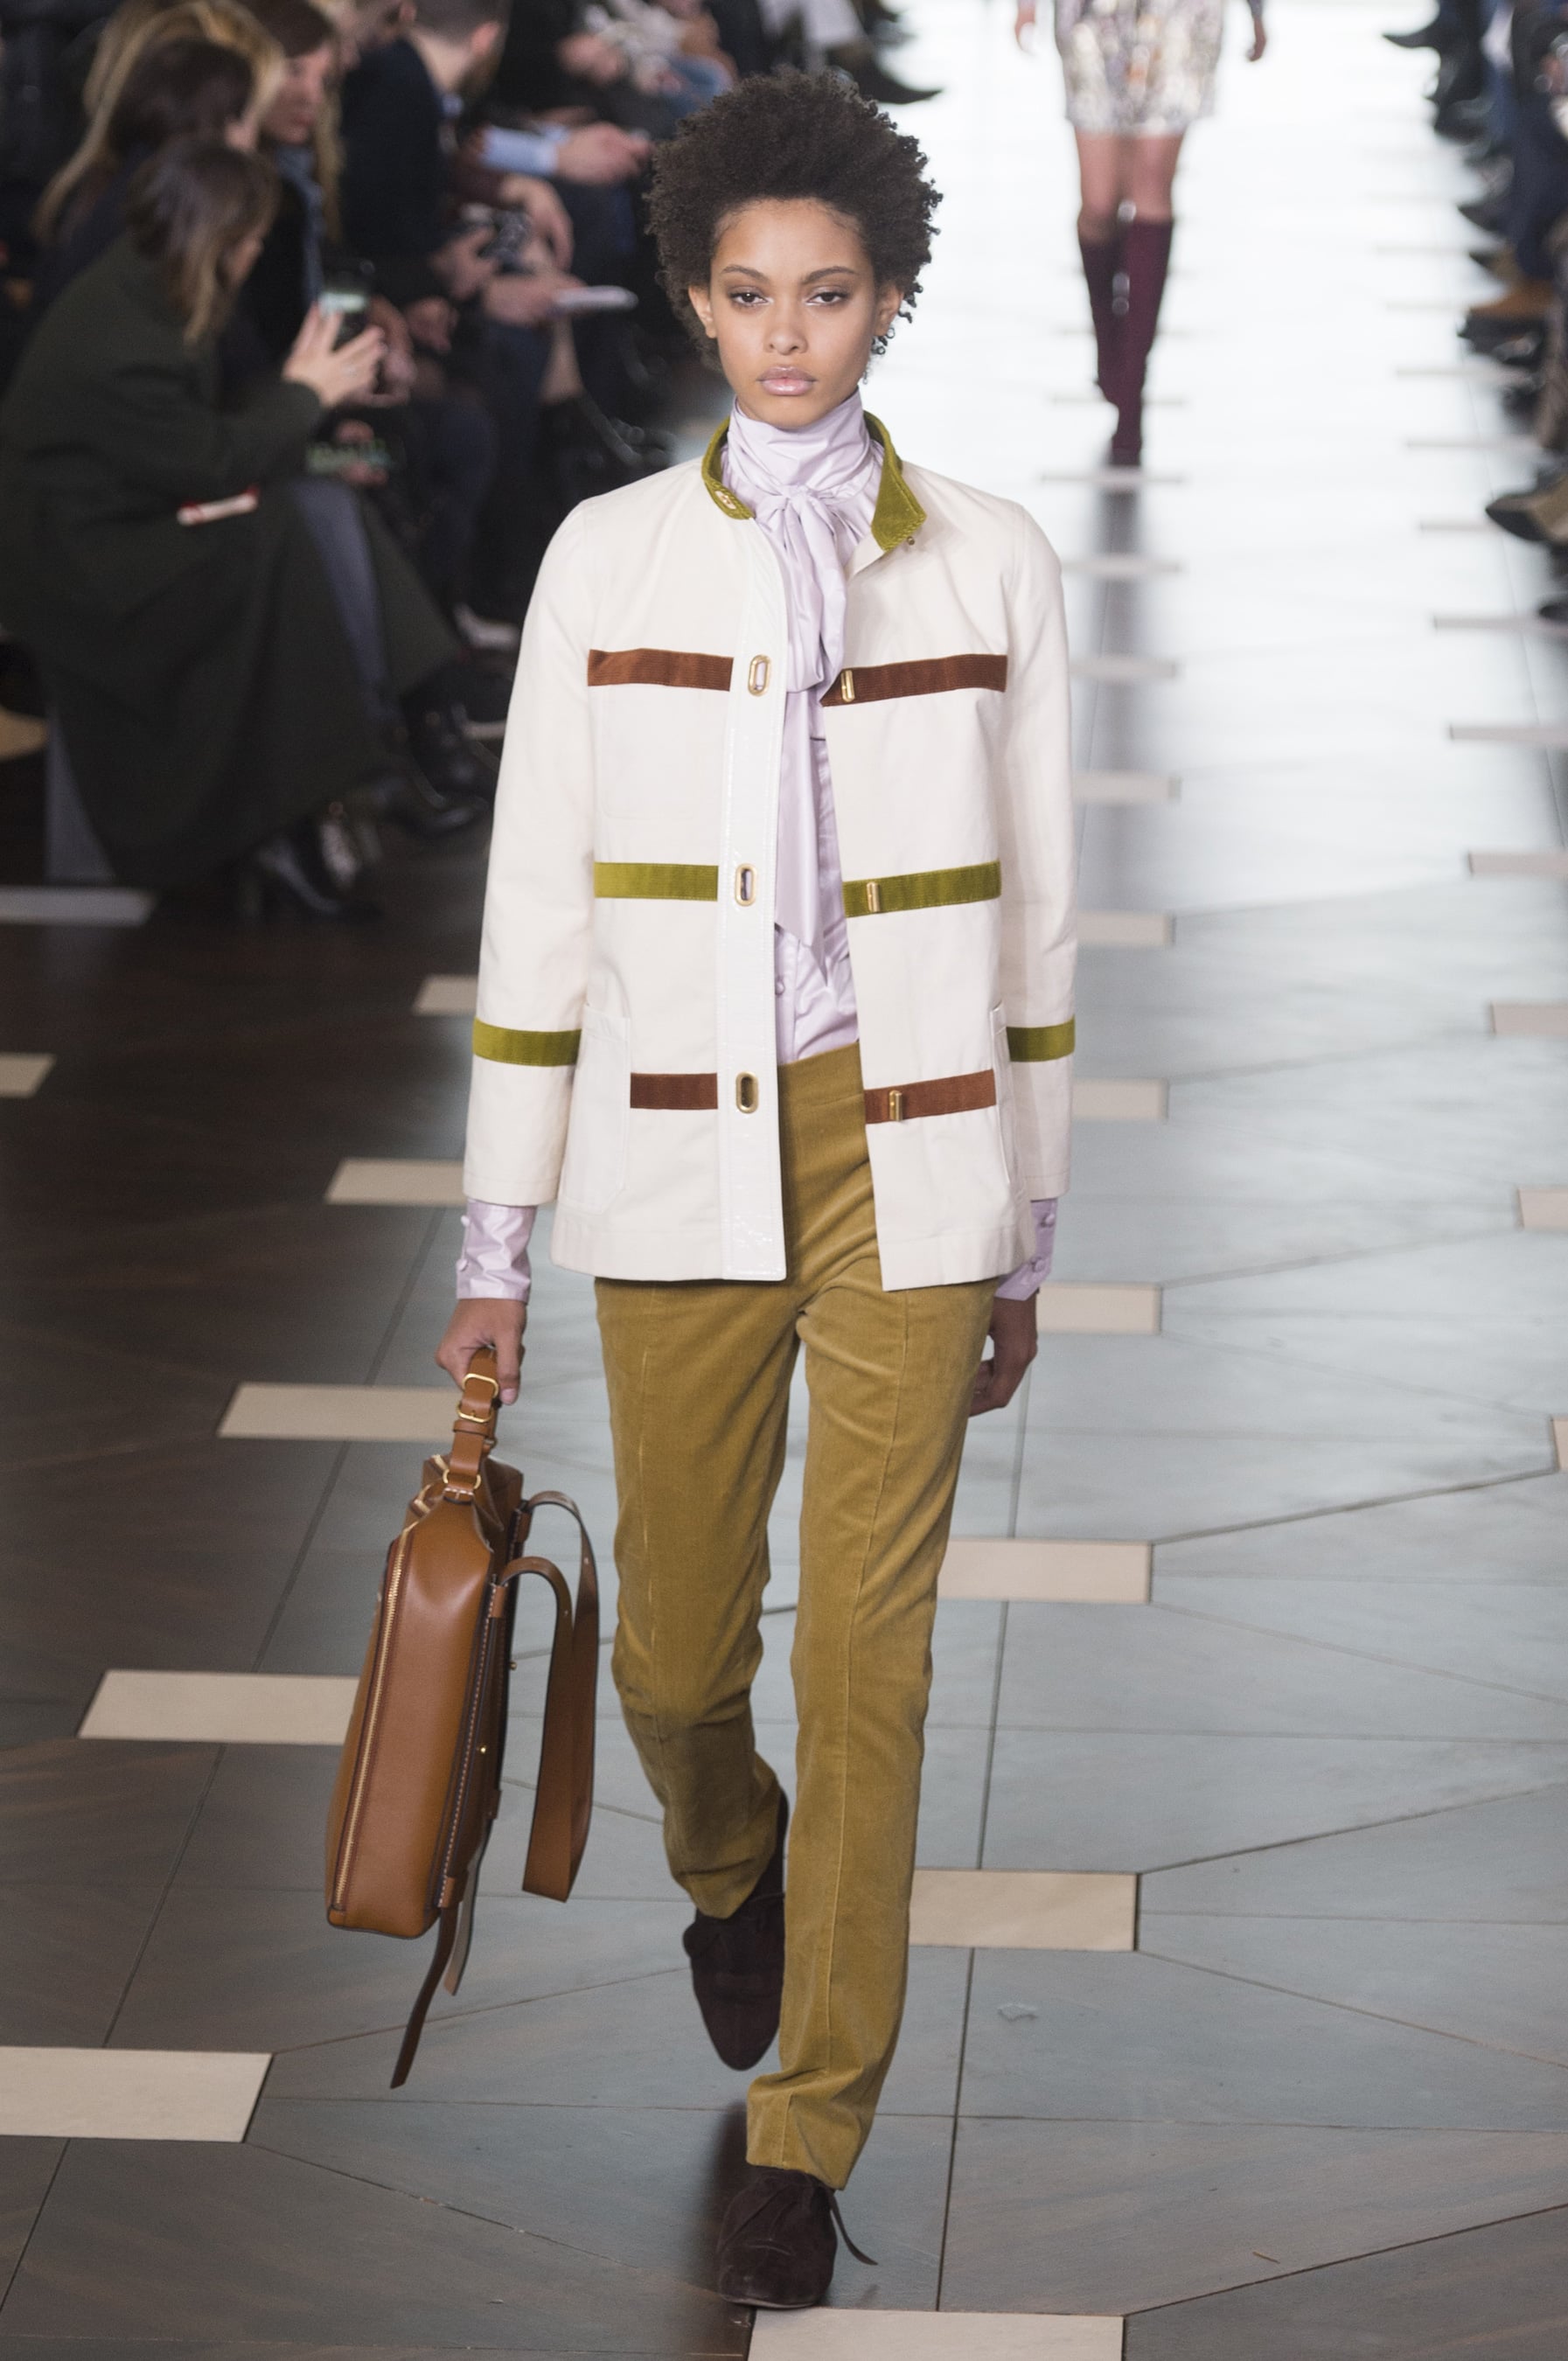 Fashion, Shopping & Style | Tory Burch Gives Her Girl Exactly What She  Wants For Fall | POPSUGAR Fashion Photo 20